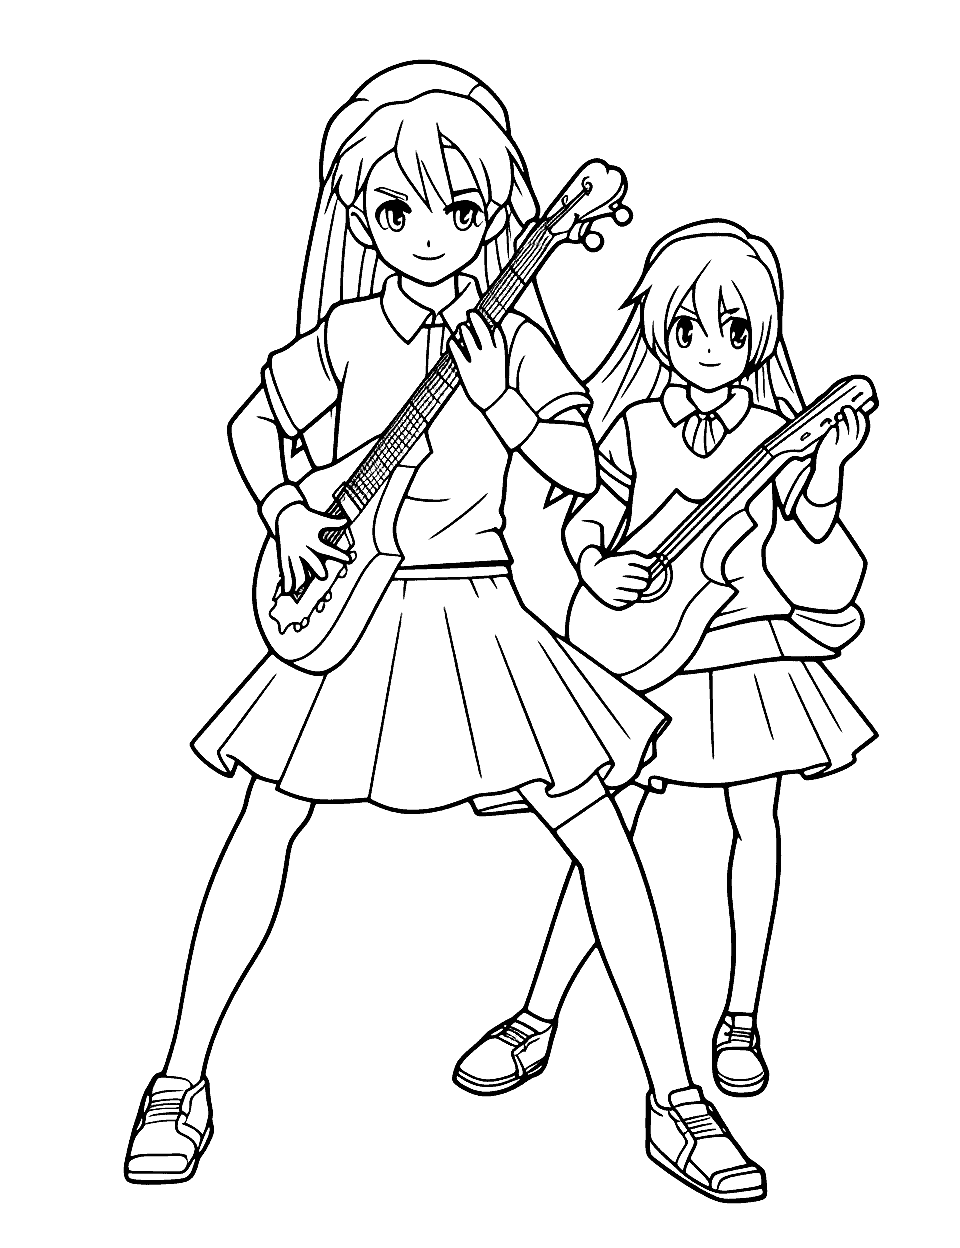 Nightcore Anime Band Coloring Page - Color the members of a nightcore anime band playing their instruments.